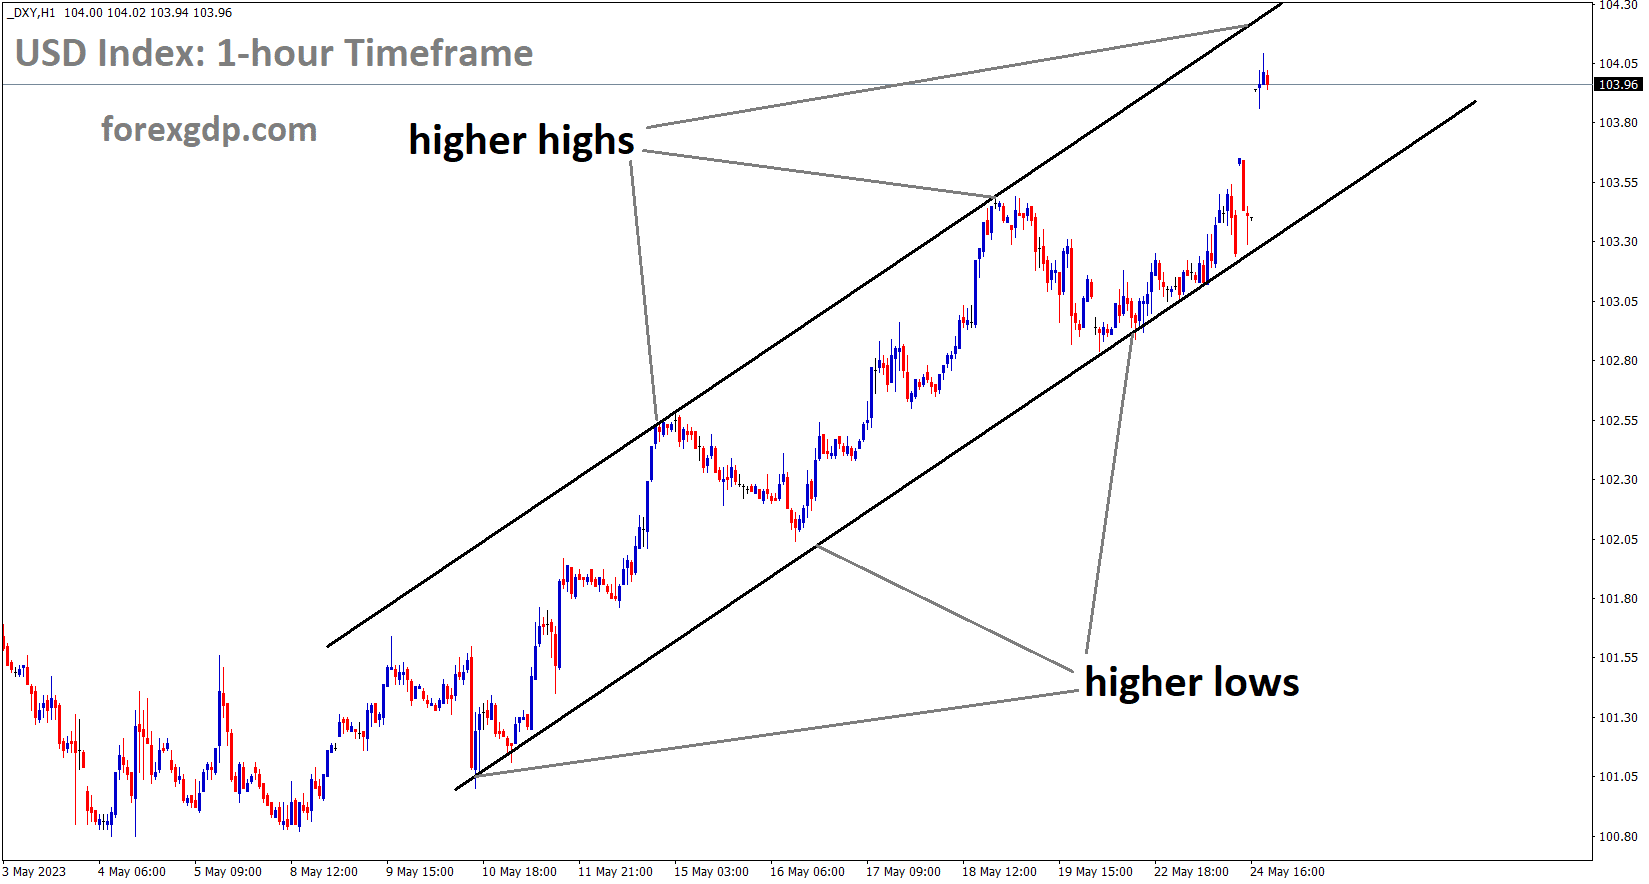 DXY US Dollar index is moving in an Ascending channel and the market has reached the higher high area of the channel